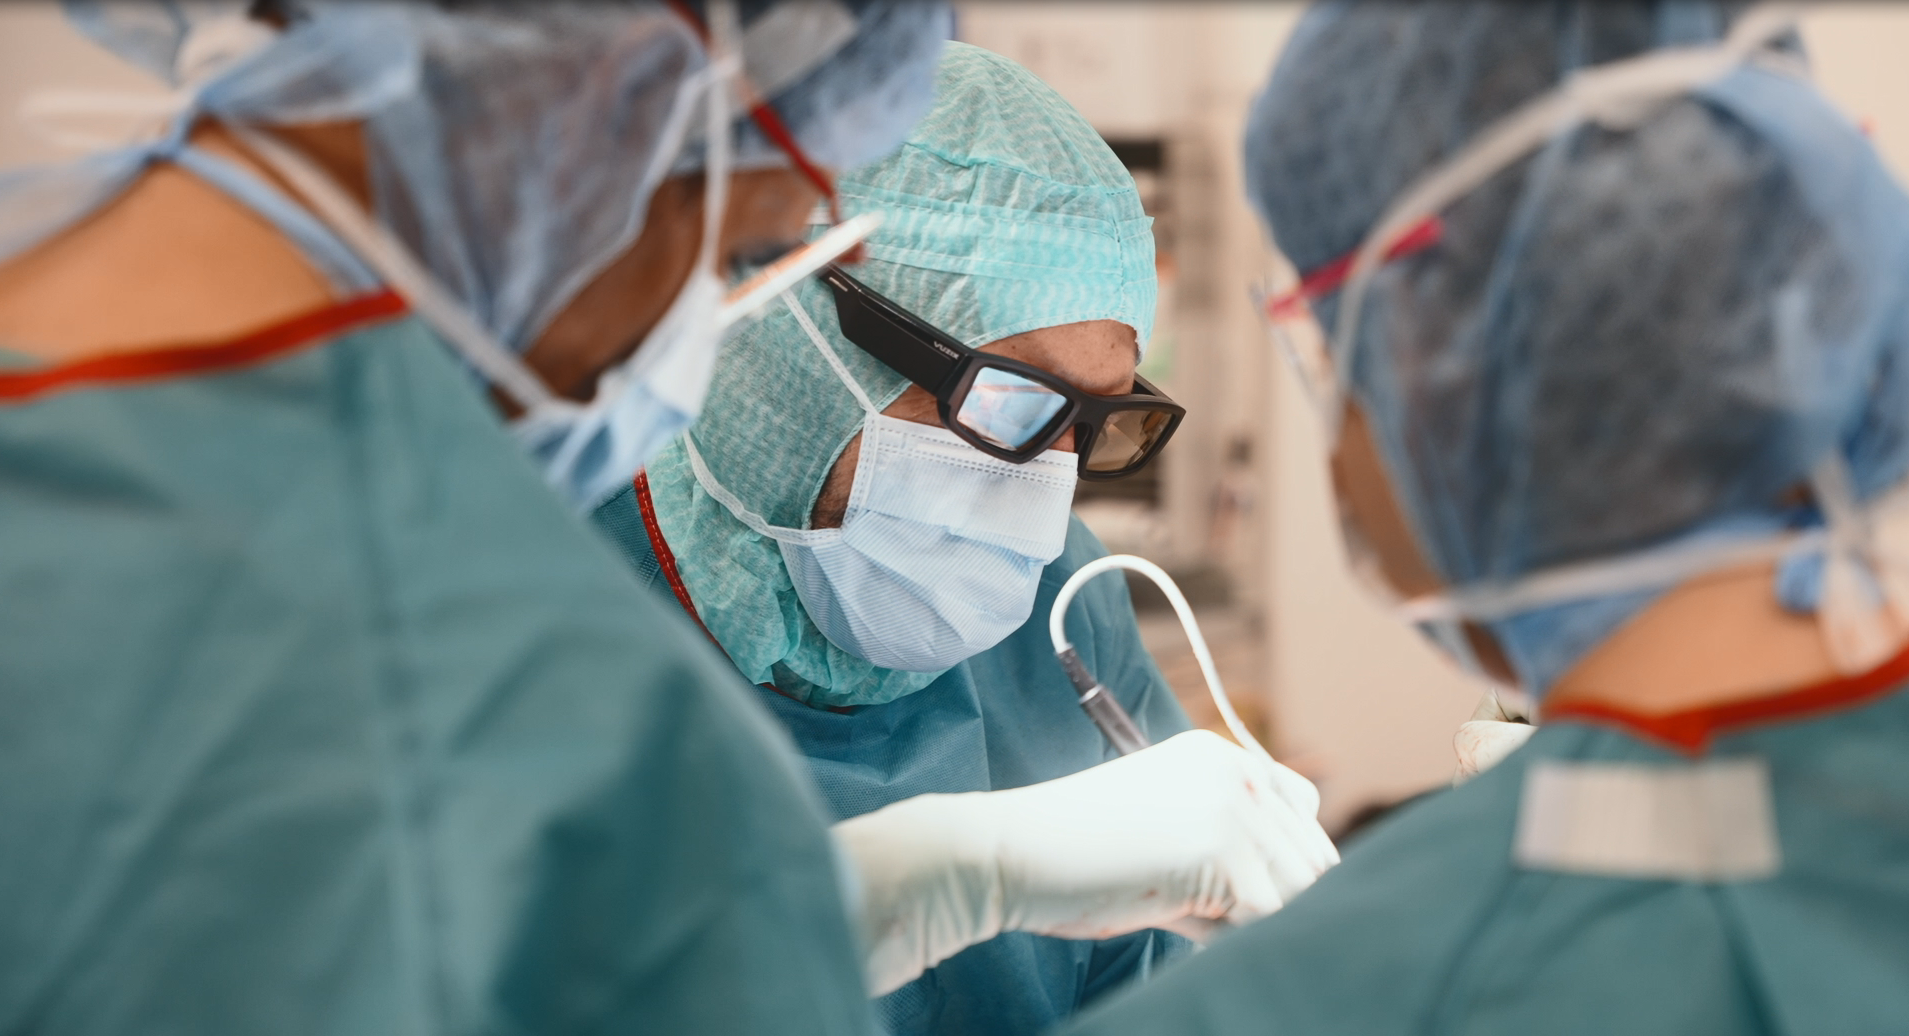 Surgeon team during an operation in hospital.